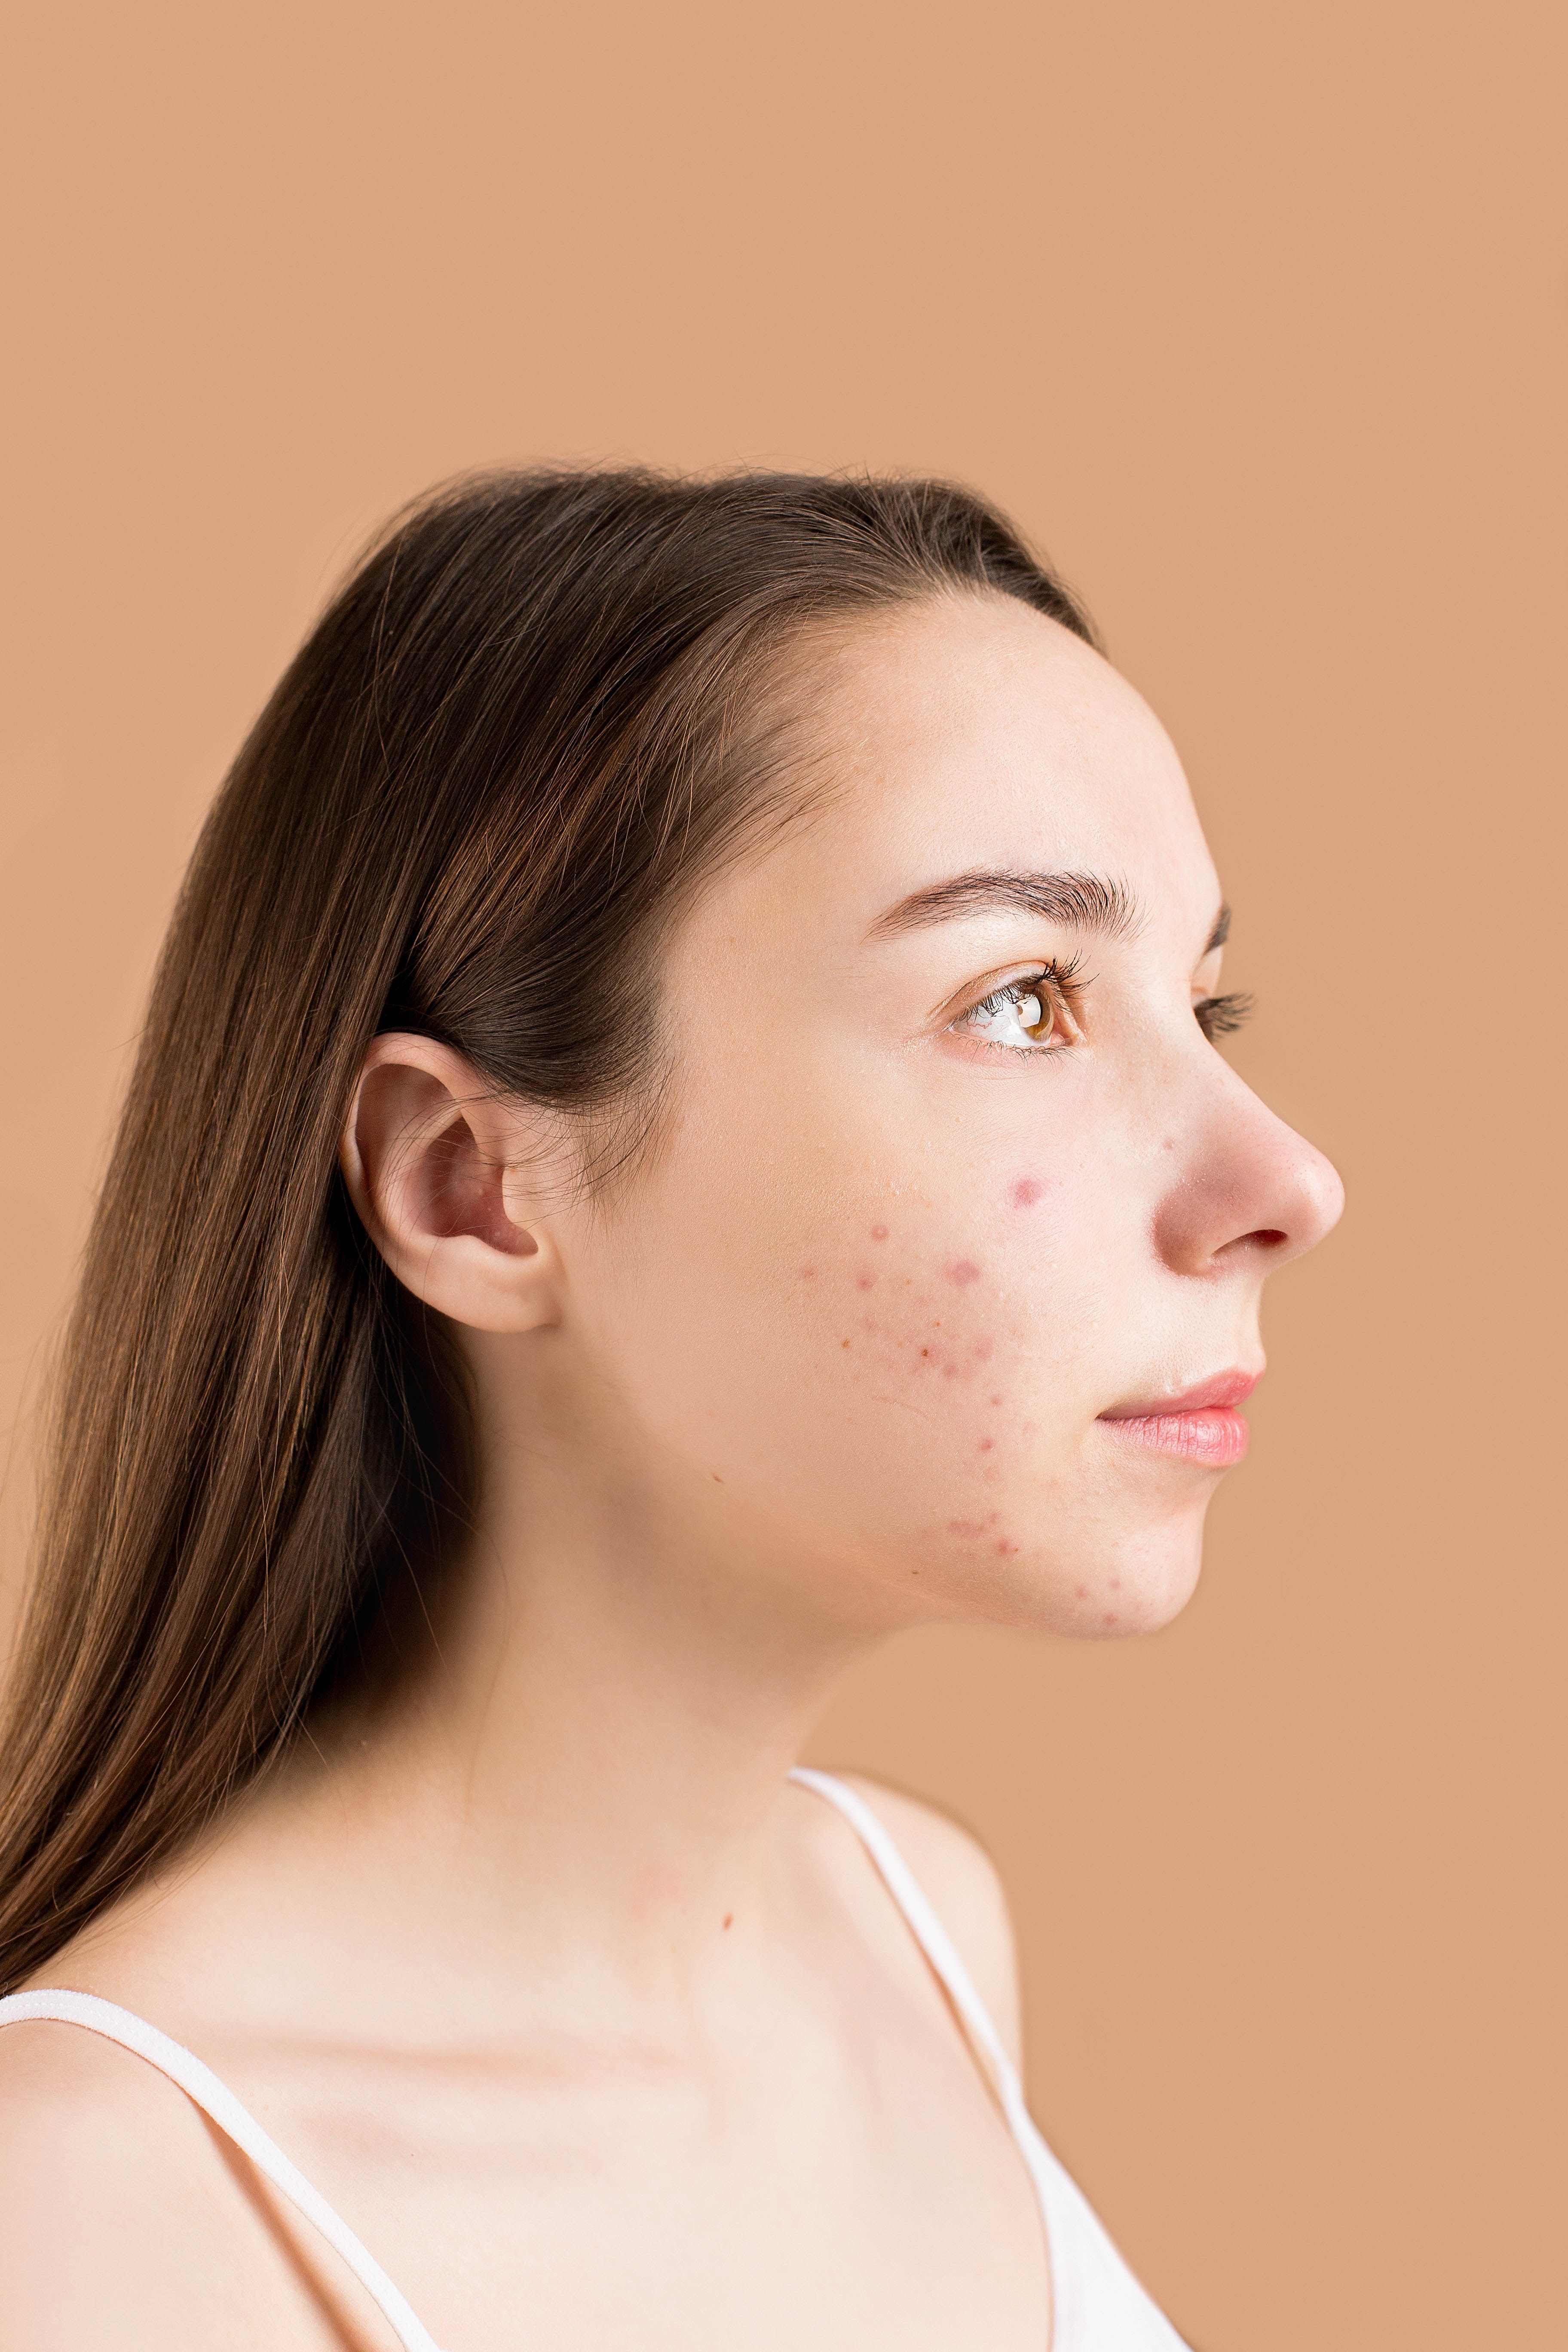 A woman with acne | Source: Pexels